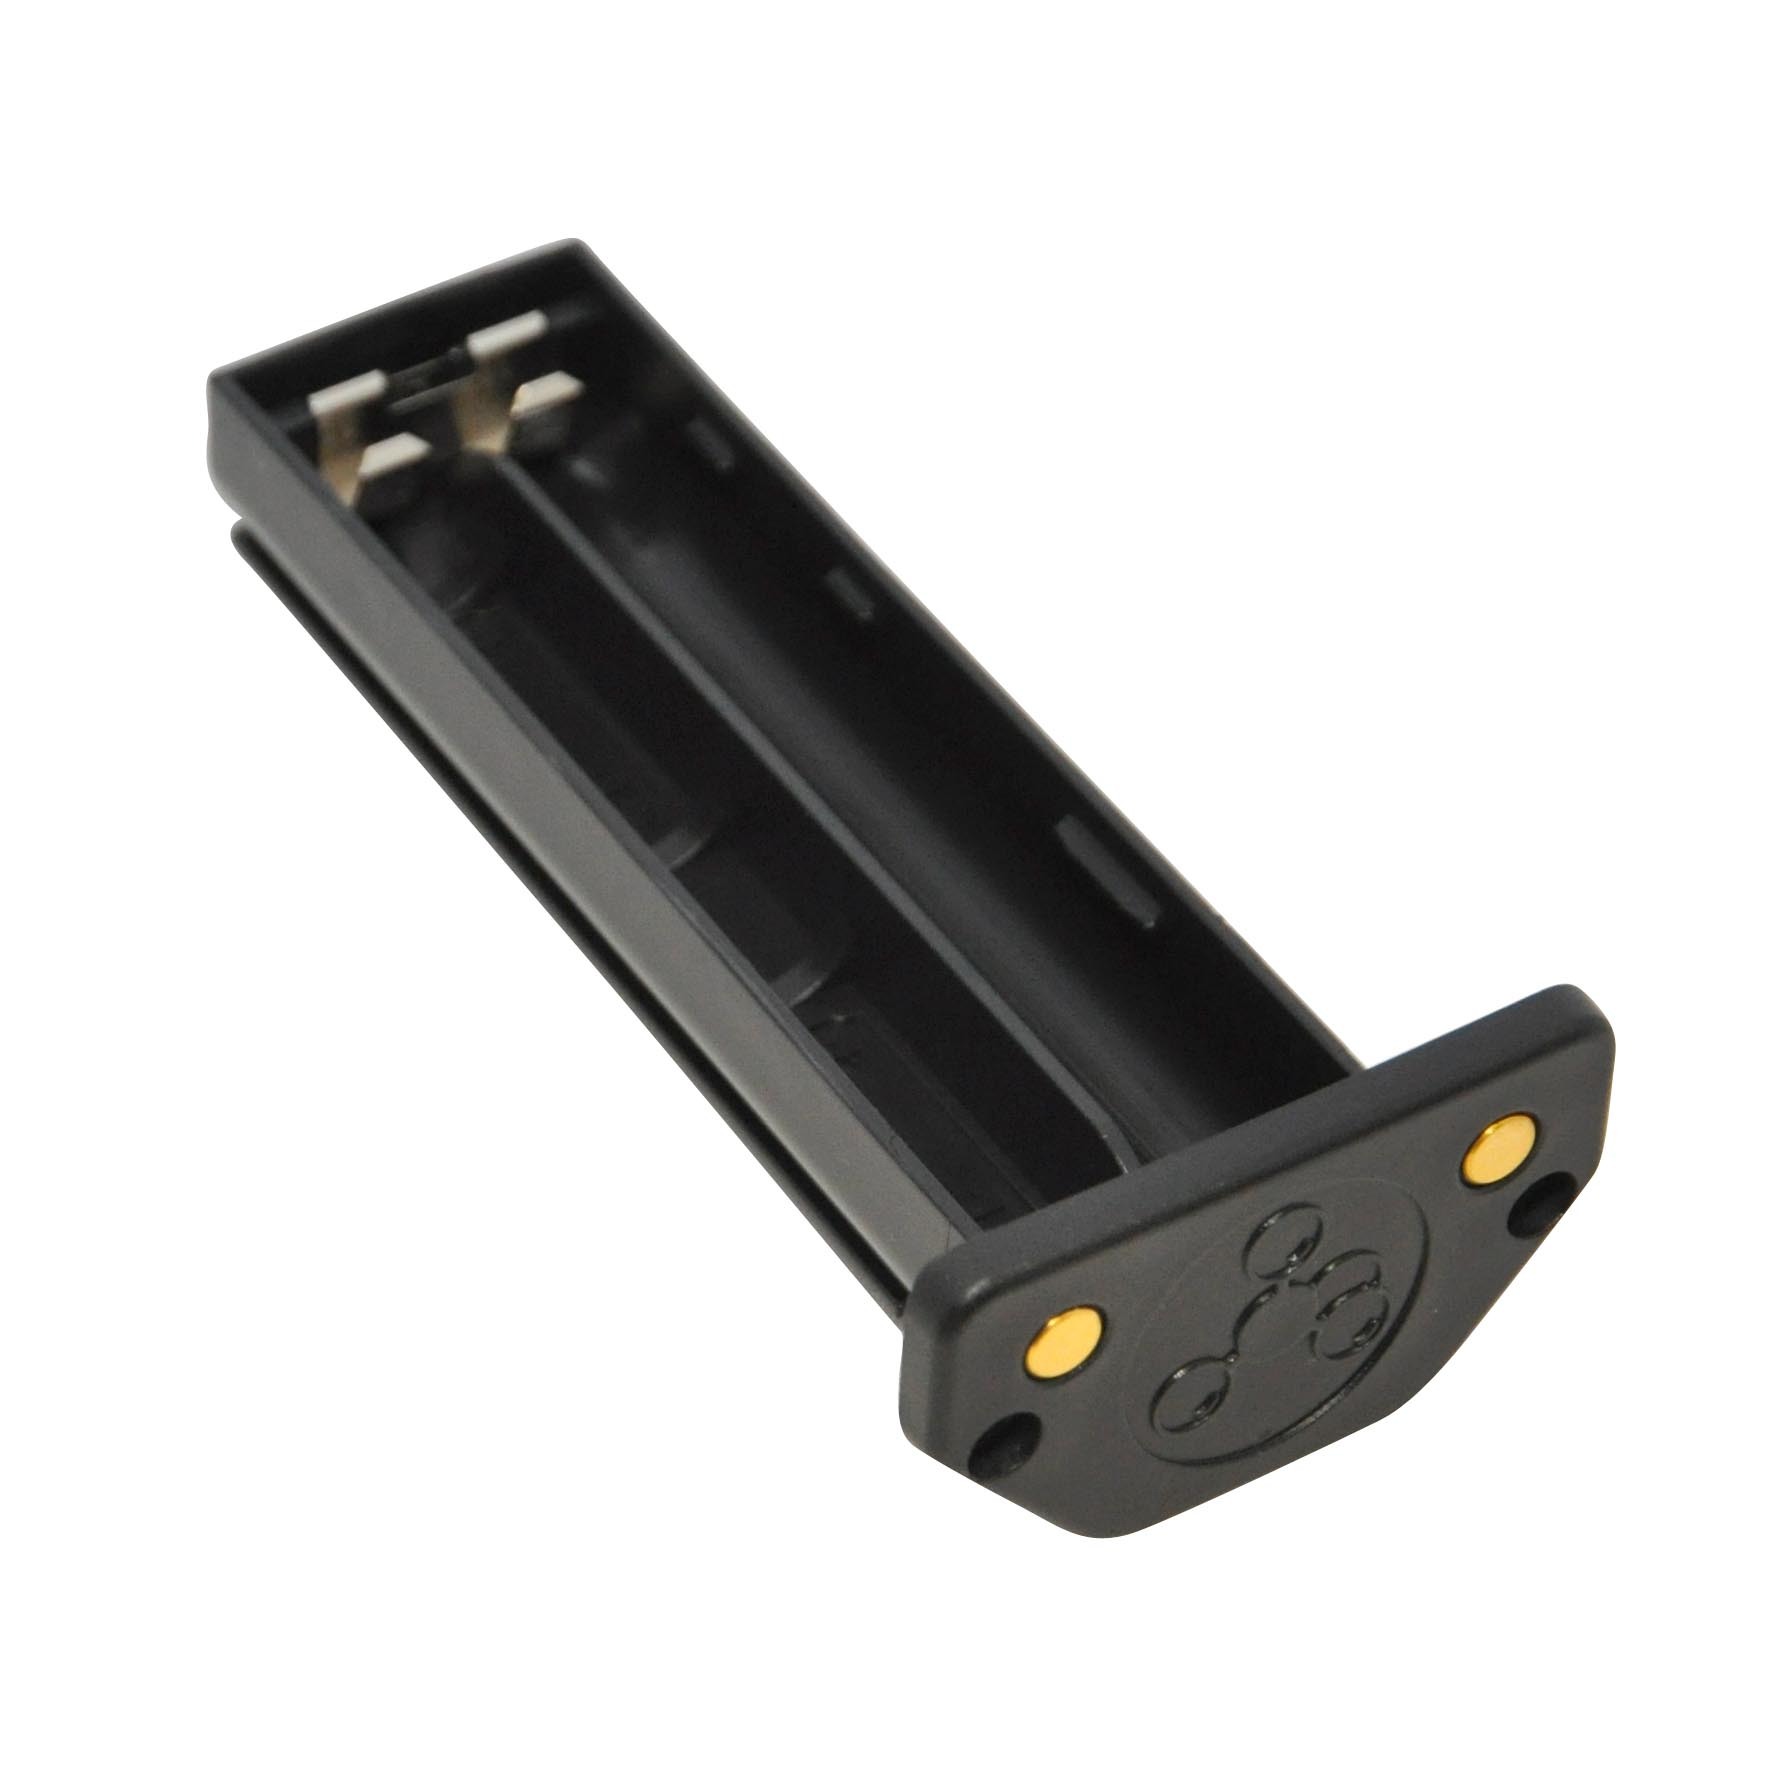 Rechargeable battery holder for HMG2 including charging contacts without battery